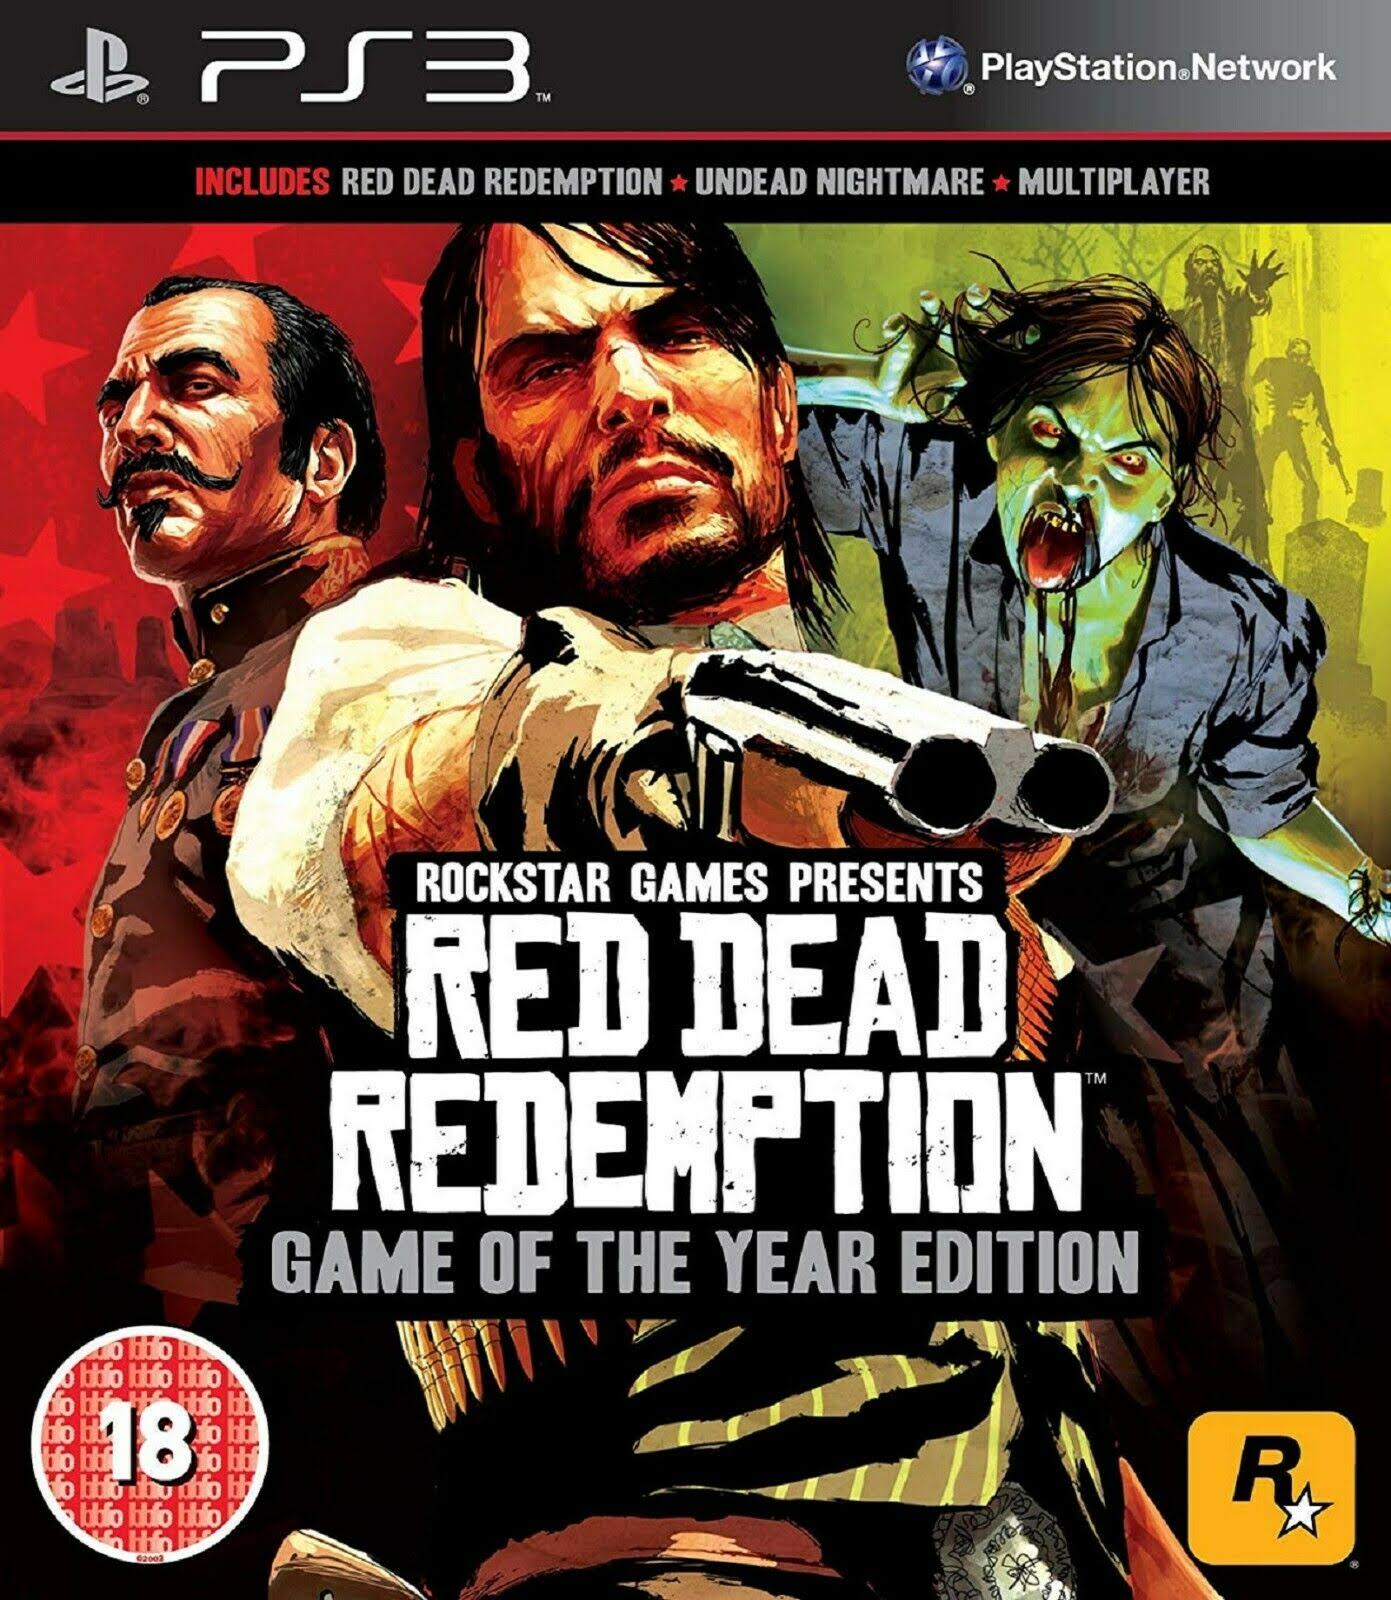 Red Dead Redemption: Game Of The Year Edition - Playstation 3